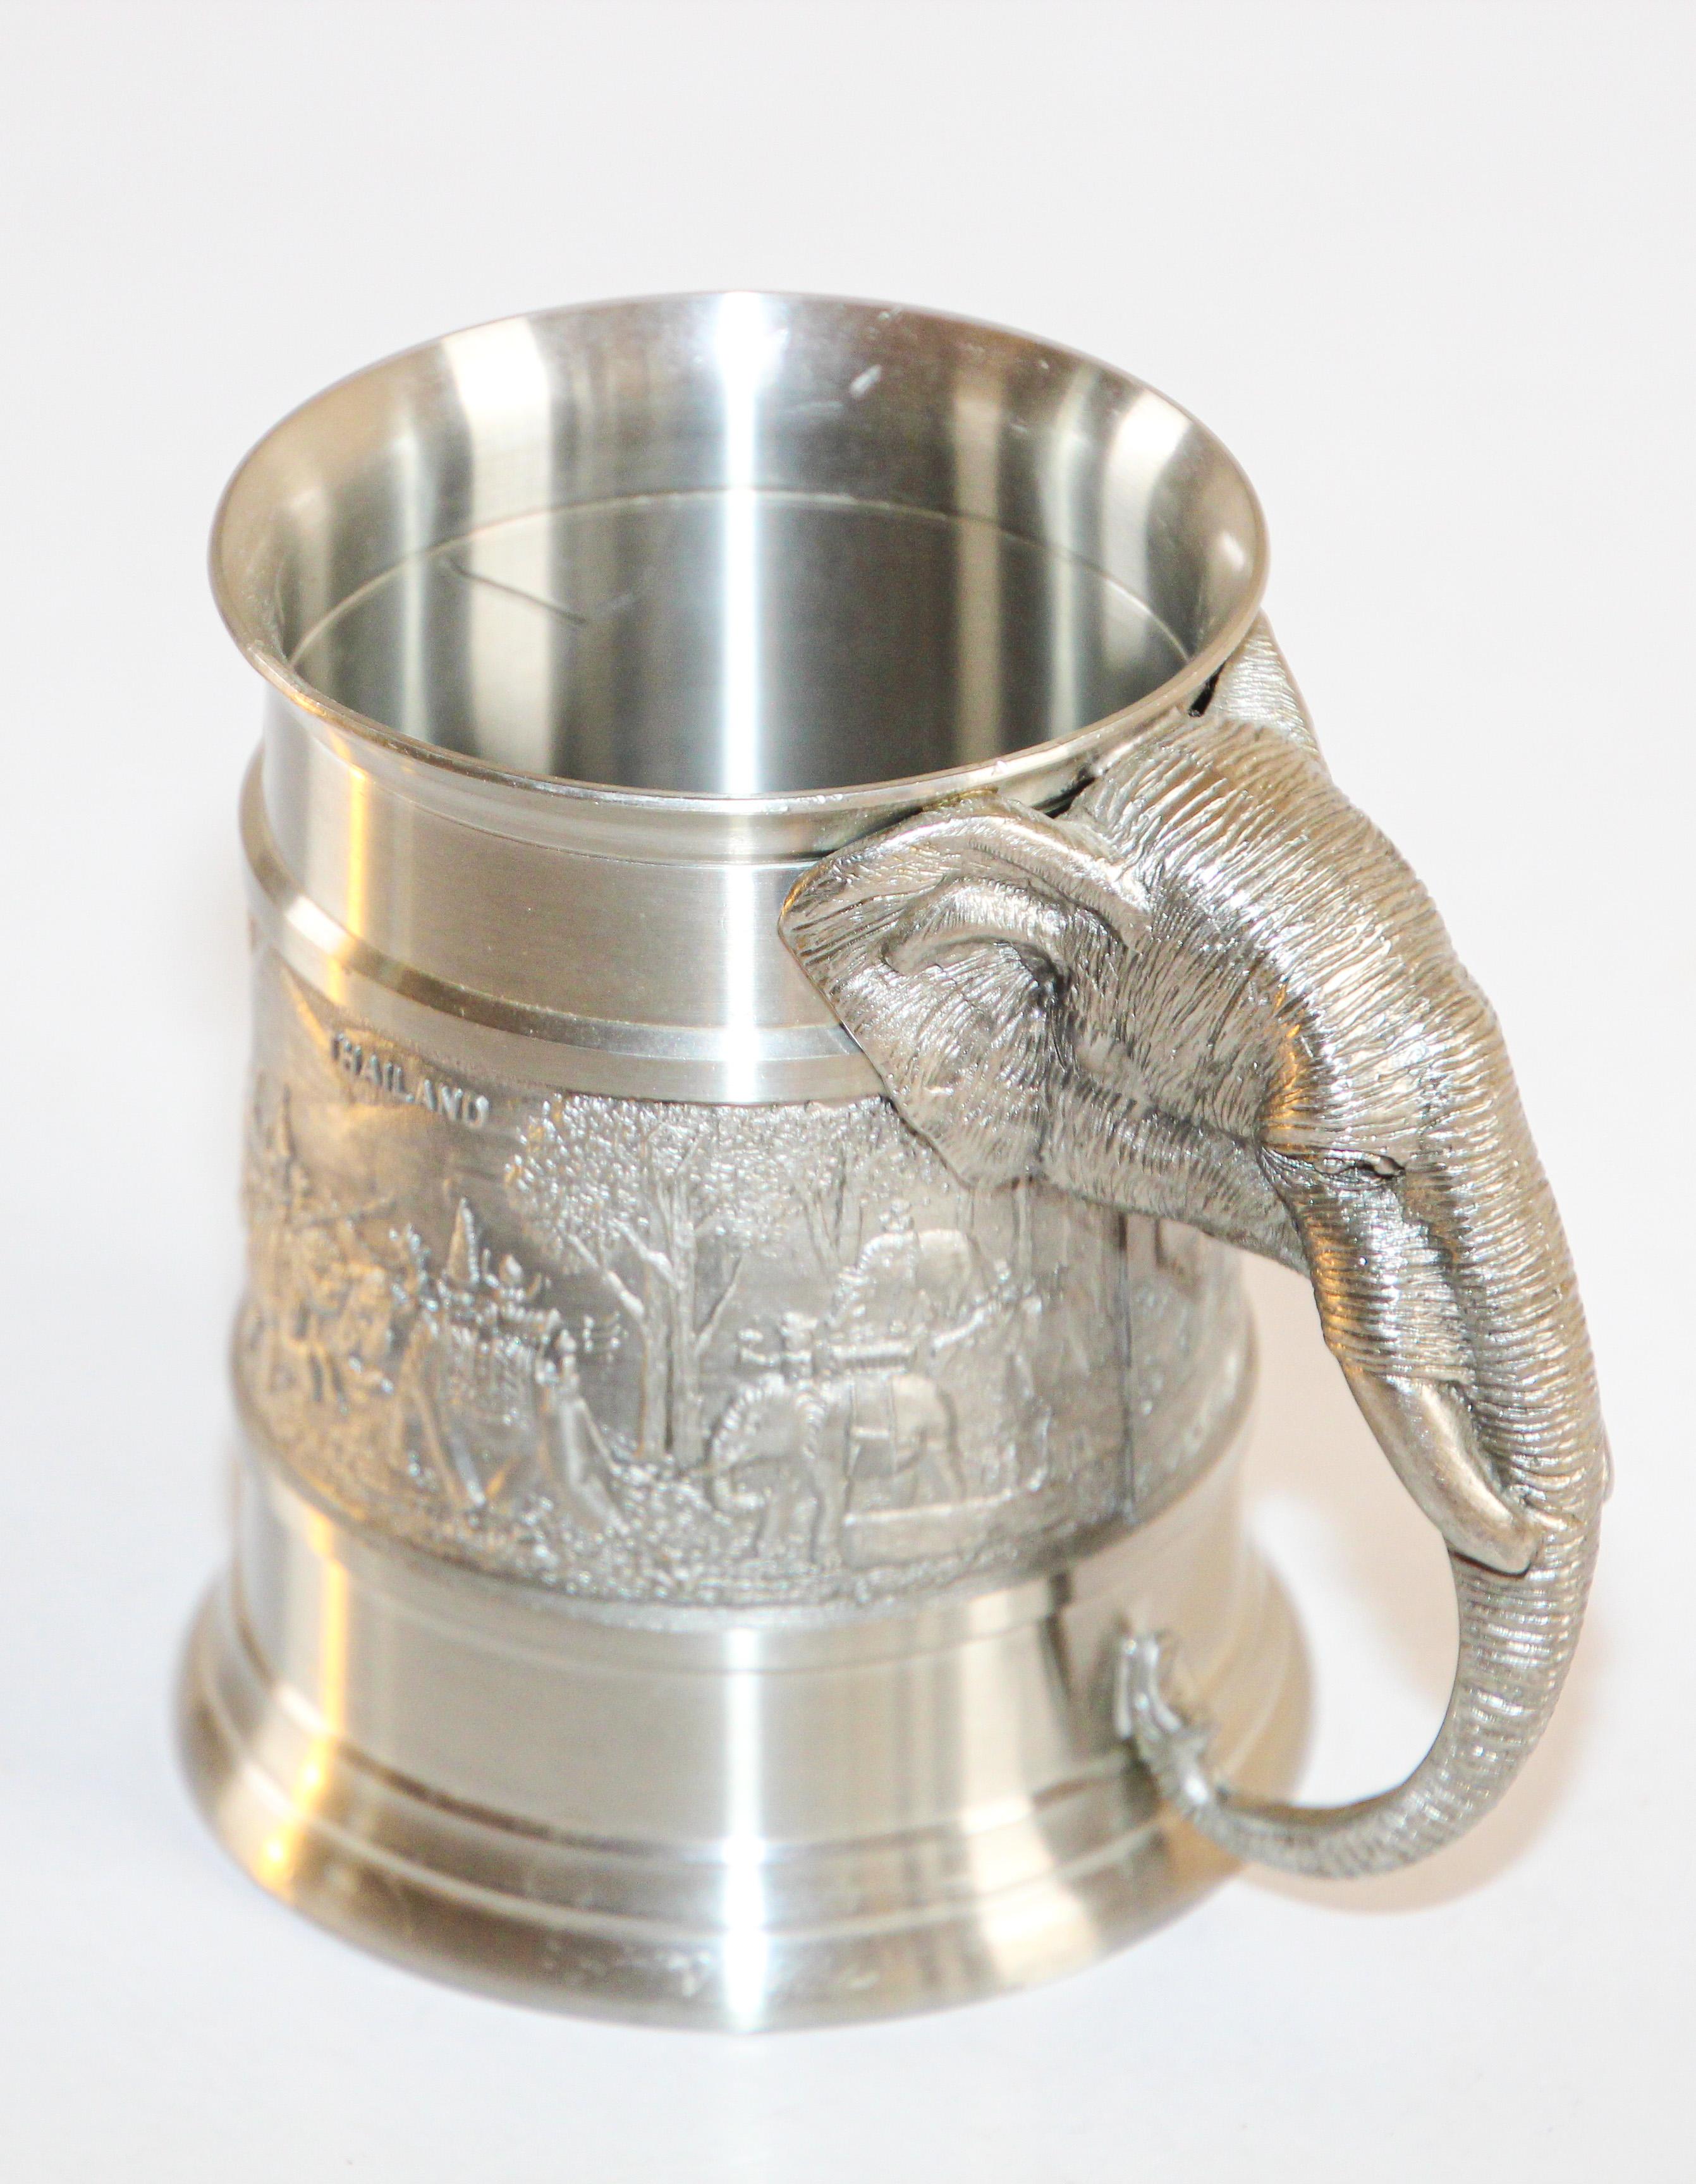 Elephant pewter mug with highly detailed embossed with motifs of elephants which is thee symbol of Thailand
Vintage Oriental pewter mug cast carved embossed design with elephant handle head.
The elephant is Thailand’s National Symbol. 
Handmade